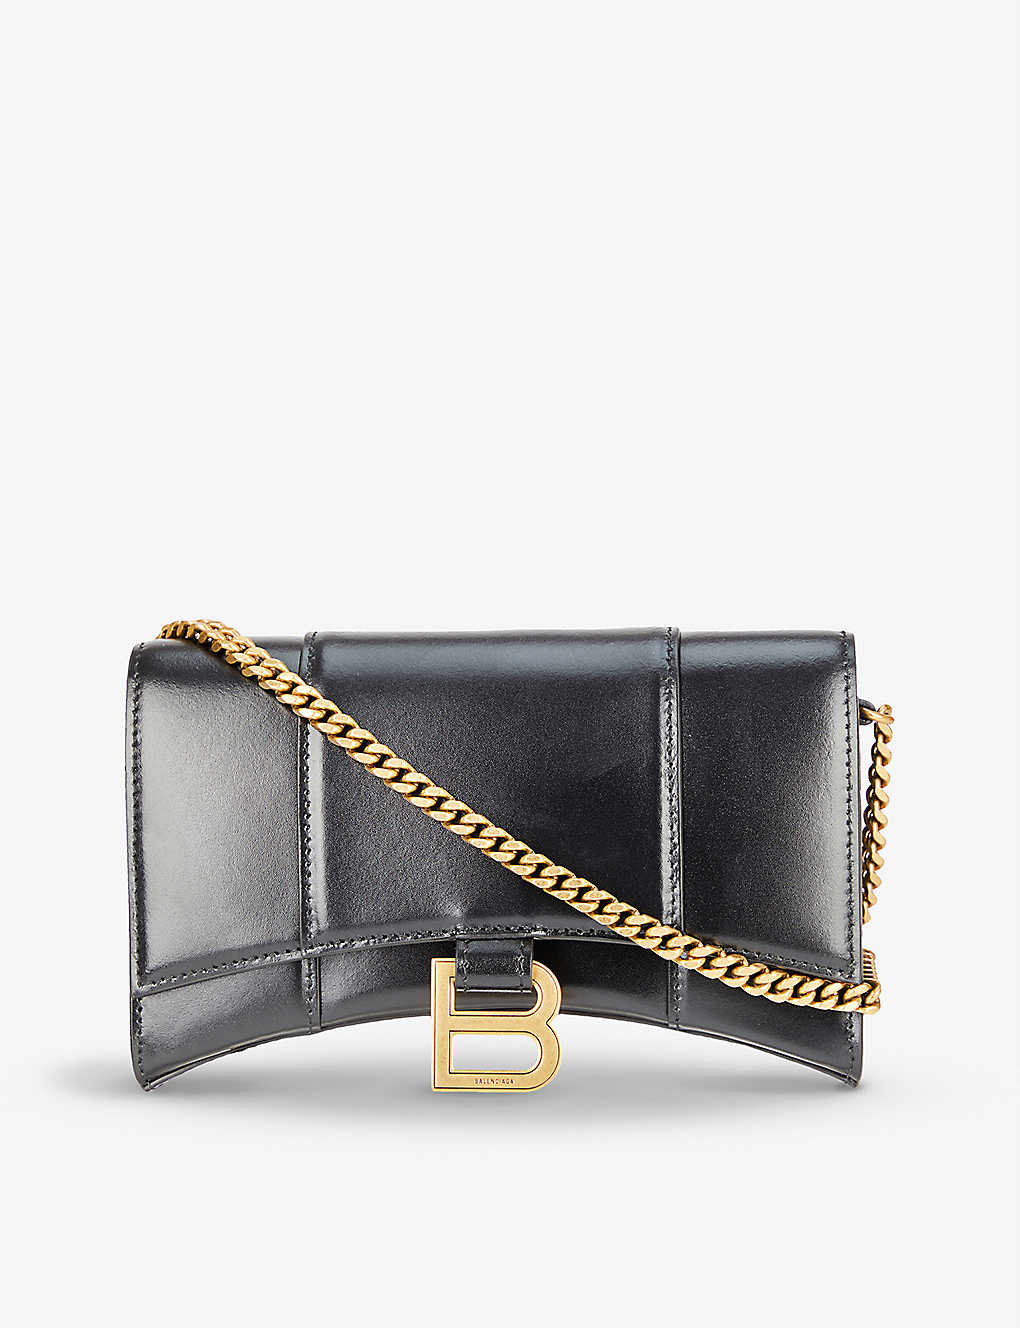 Balenciaga Hourglass Leather Wallet-on-chain In Black/gold